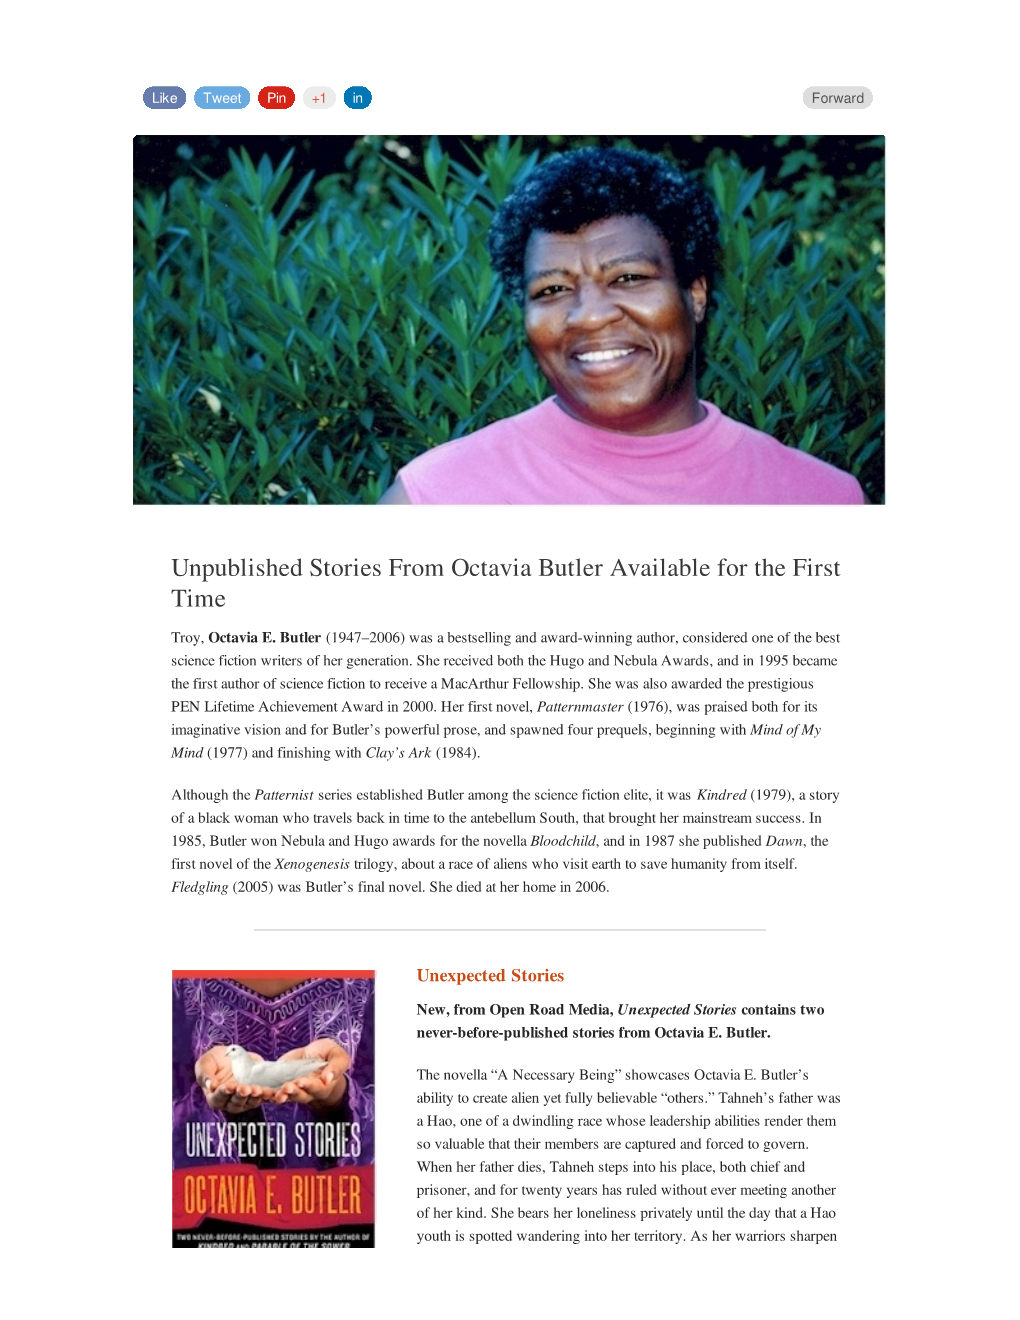 Unpublished Stories from Octavia Butler Available for the First Time